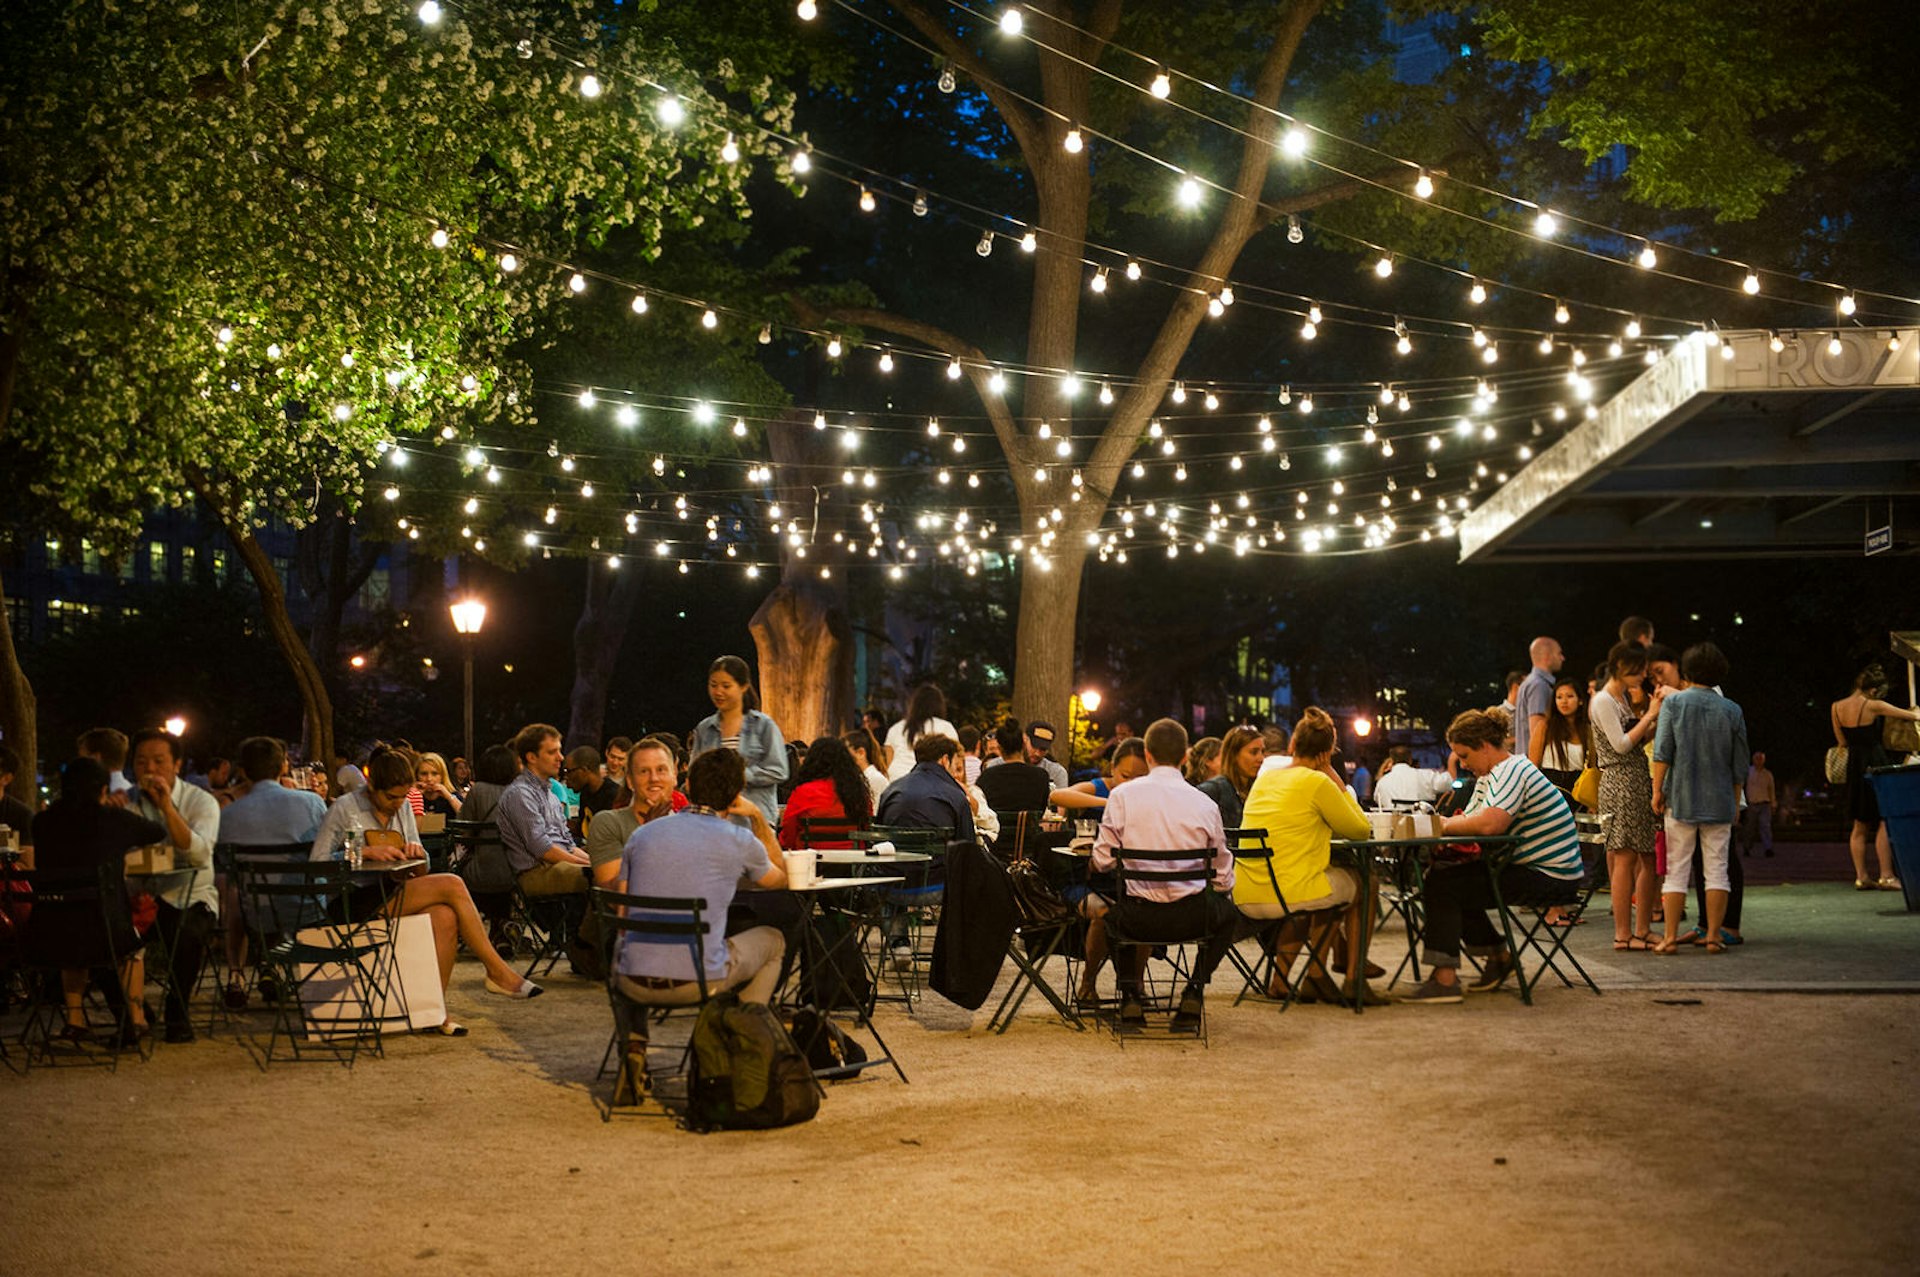 Numerous of tables and patrons sit beneath rows of golden fairy lights hanging from trees within Madidson Square Park